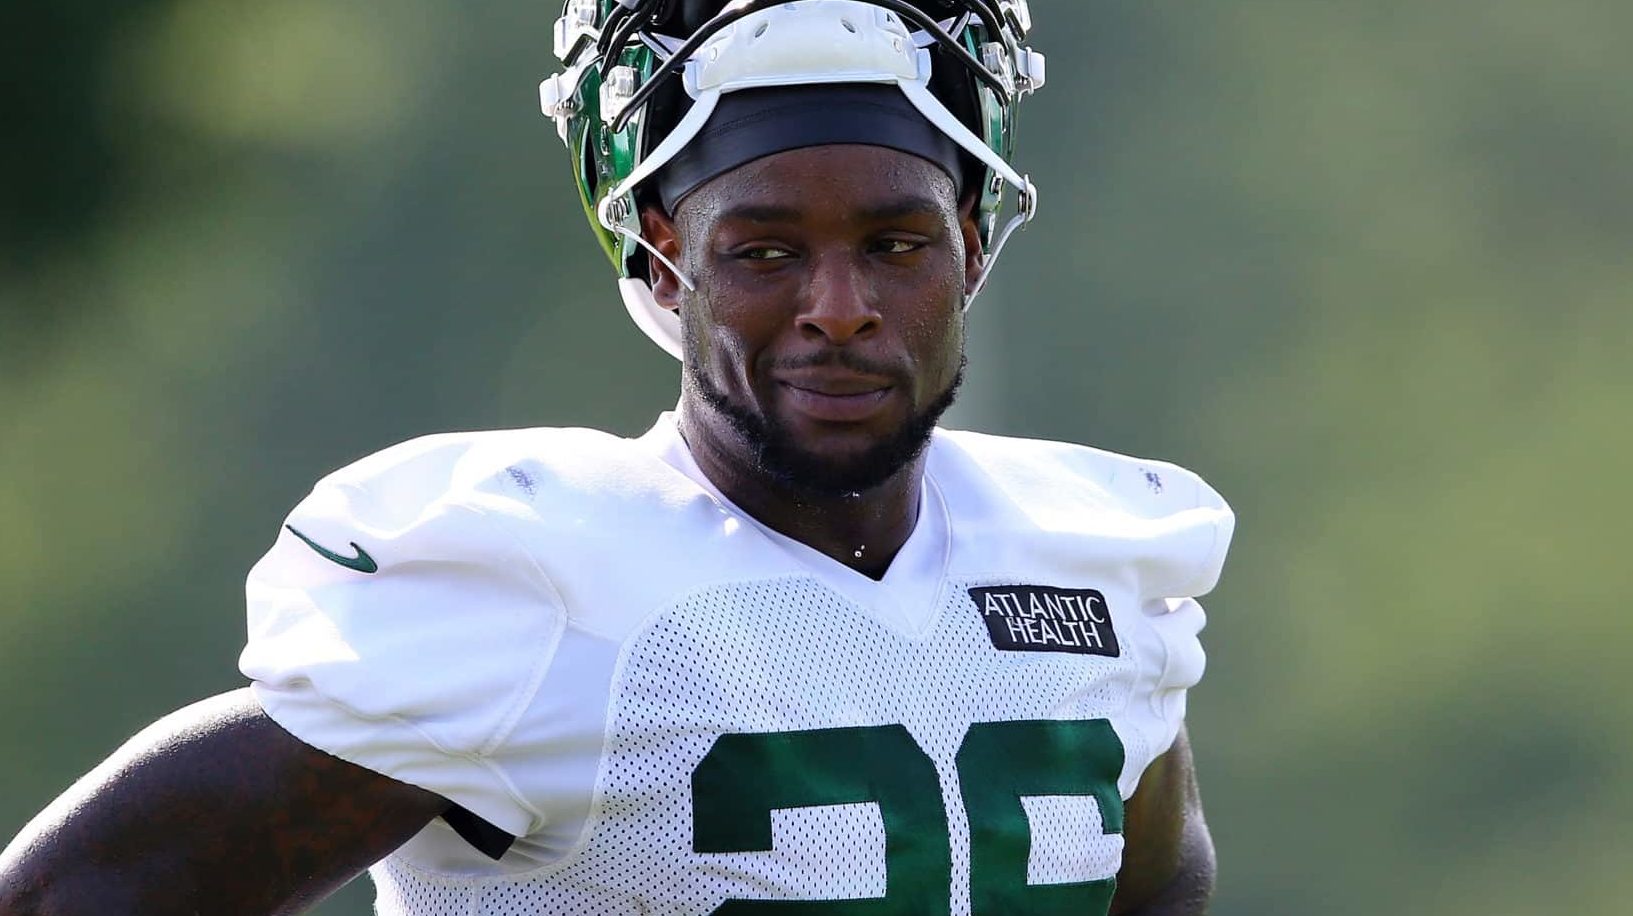 FLORHAM PARK, NEW JERSEY - AUGUST 14: Le'Veon Bell #26 of the New York Jets looks on at Atlantic Health Jets Training Center on August 14, 2020 in Florham Park, New Jersey.